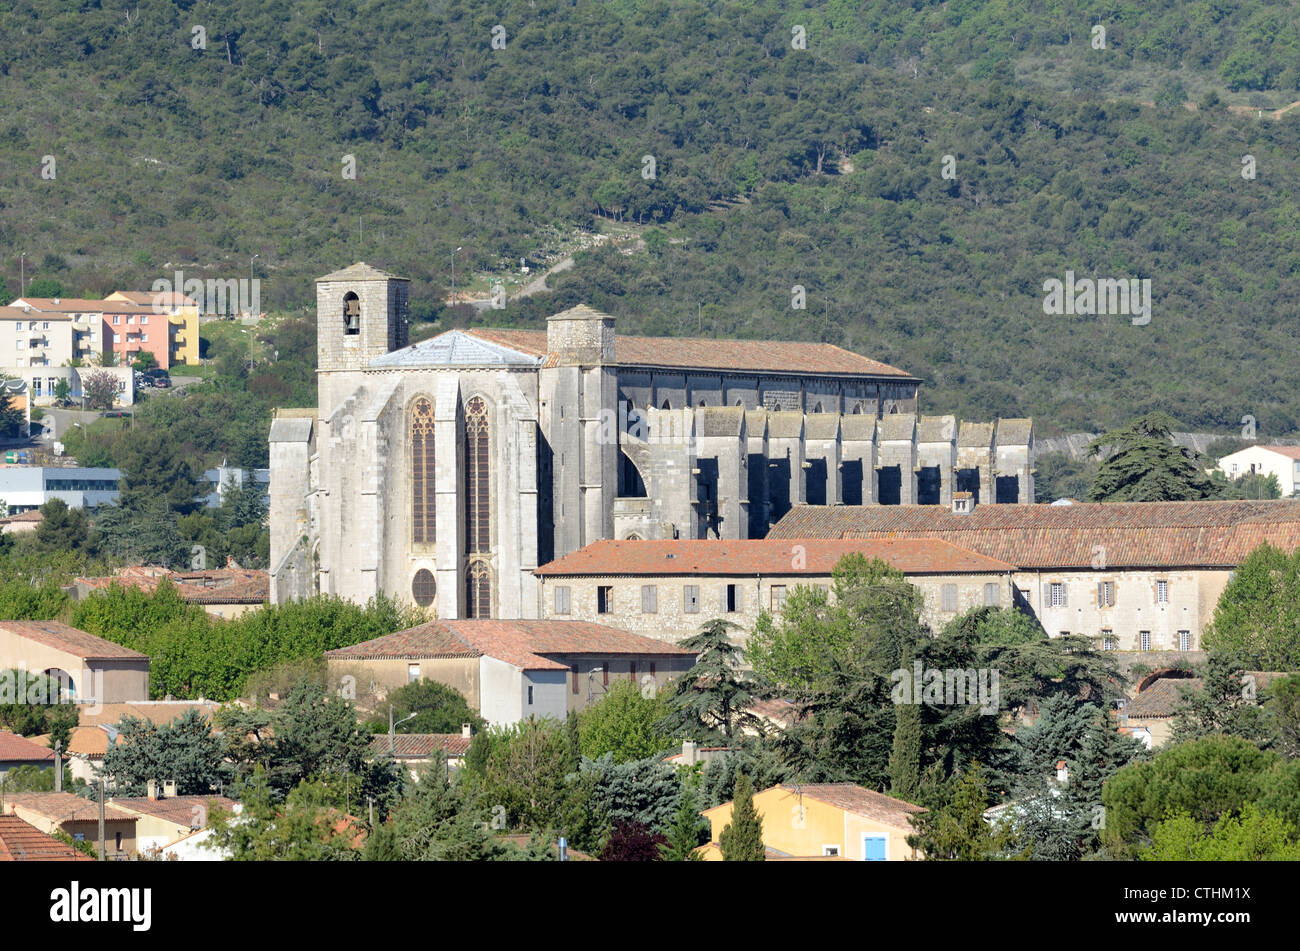 Church or Basilca of Mary Magdalene and View over the Town of Saint-Maximin-la-Sainte-Baume Var Département Provence France Stock Photo